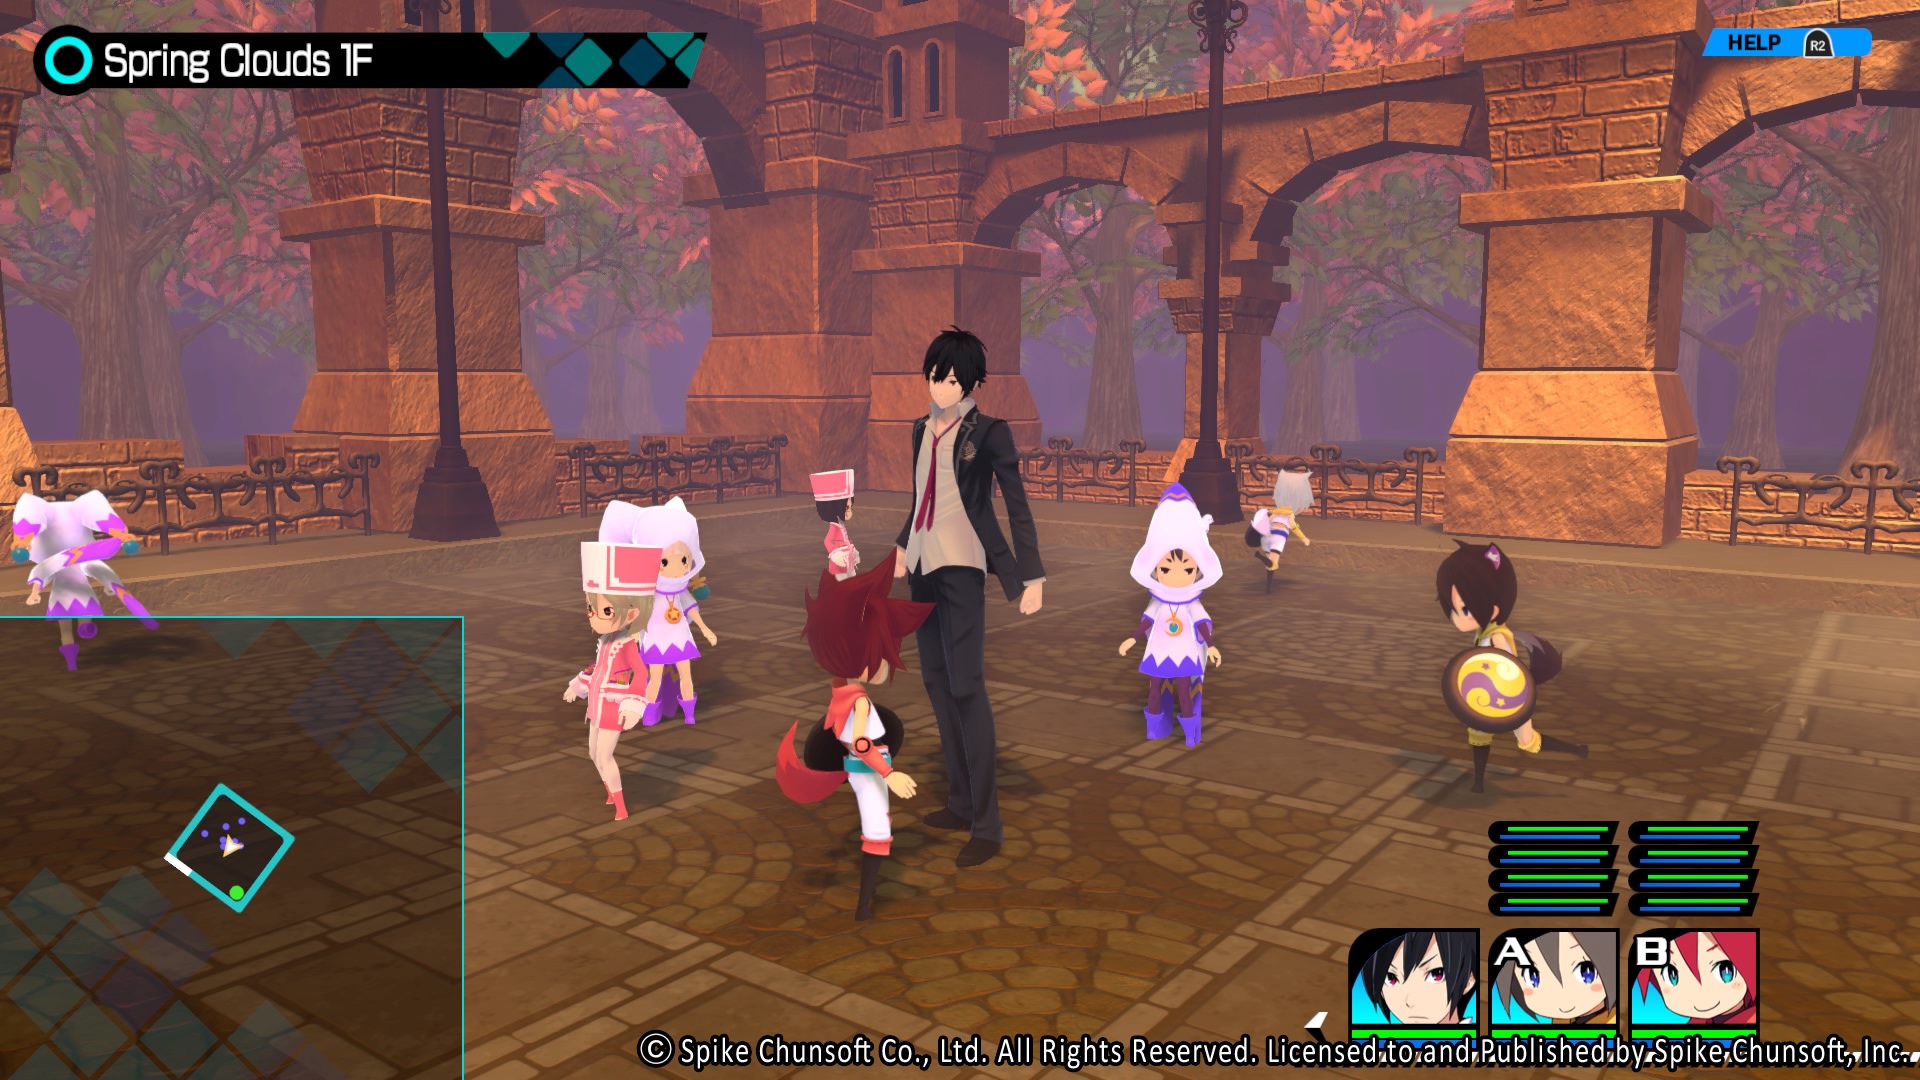  Conception Plus: Maiden Of The Twelve Stars (PS4